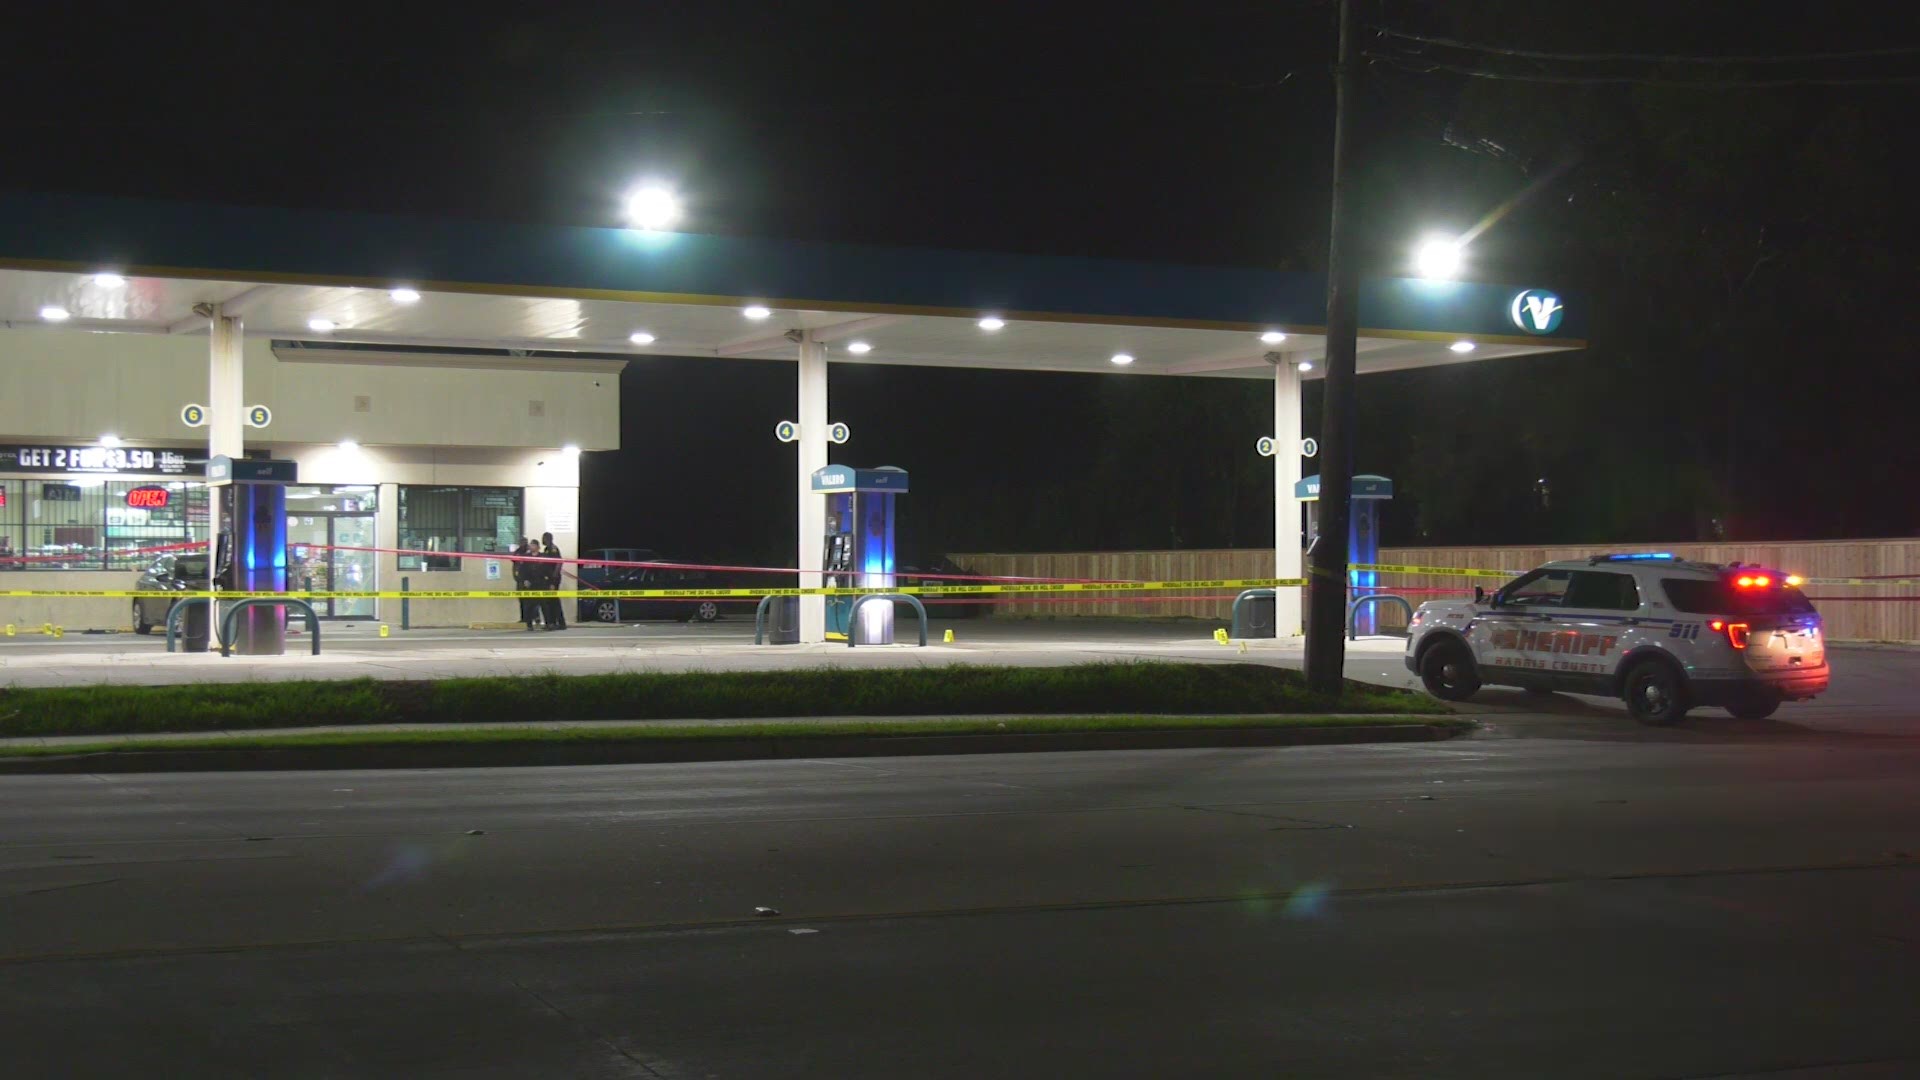 An argument at a Crosby gas station led to a gun fight between a group of men. Three people were injured, but luckily, no one was killed.